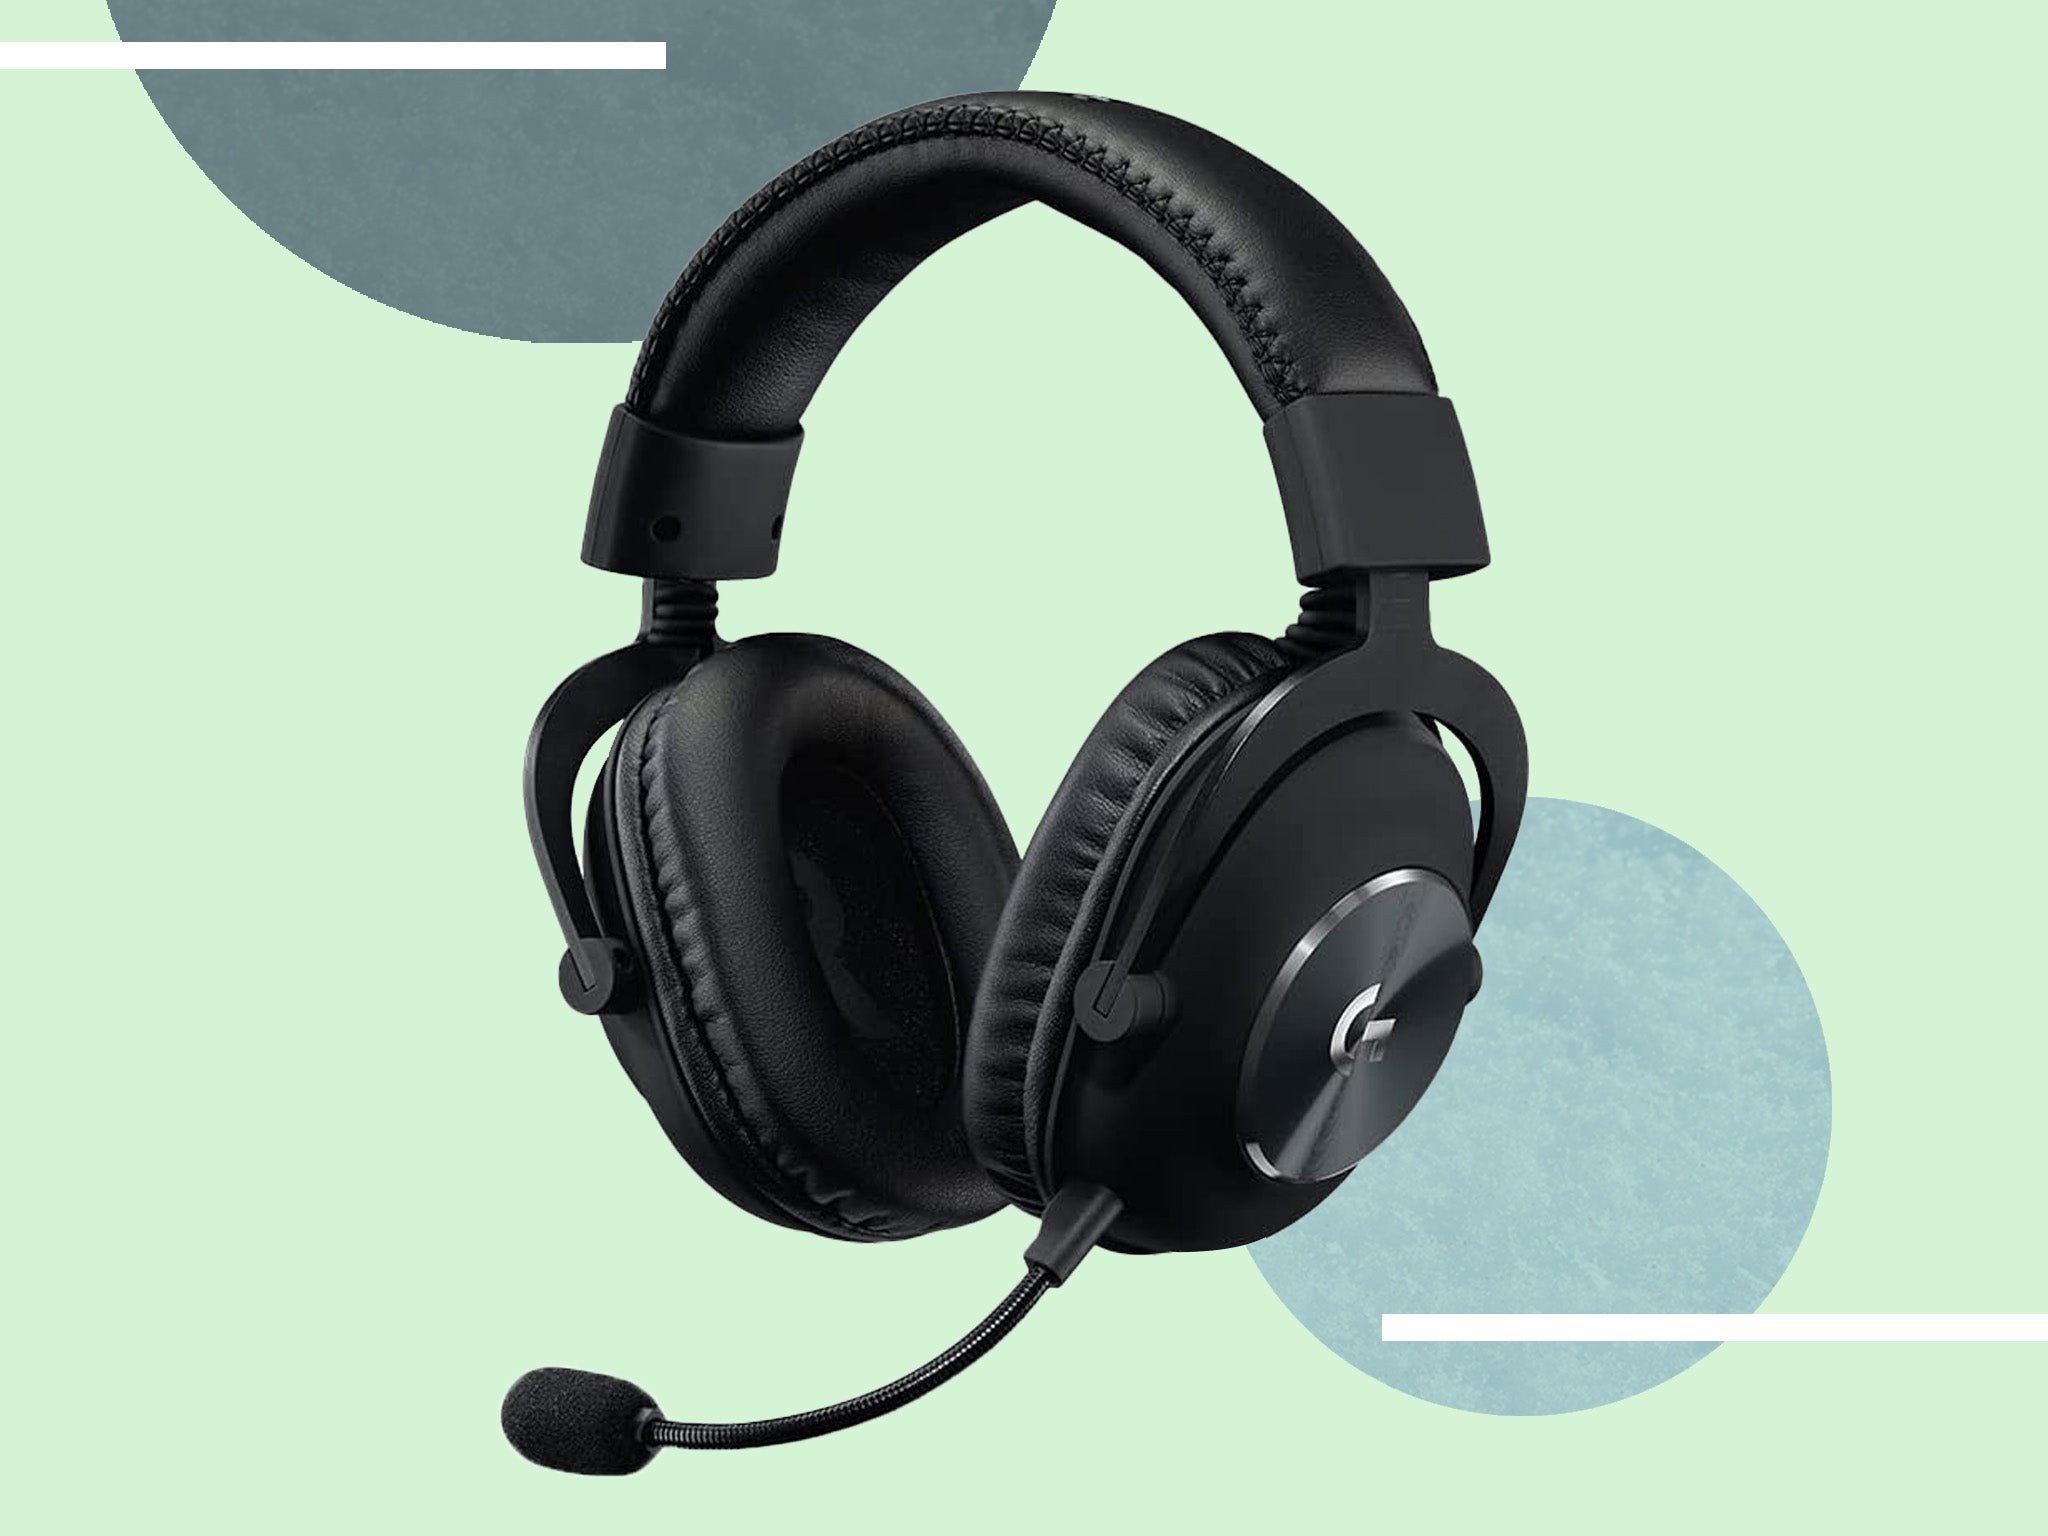 The headphones work with computers and consoles alike